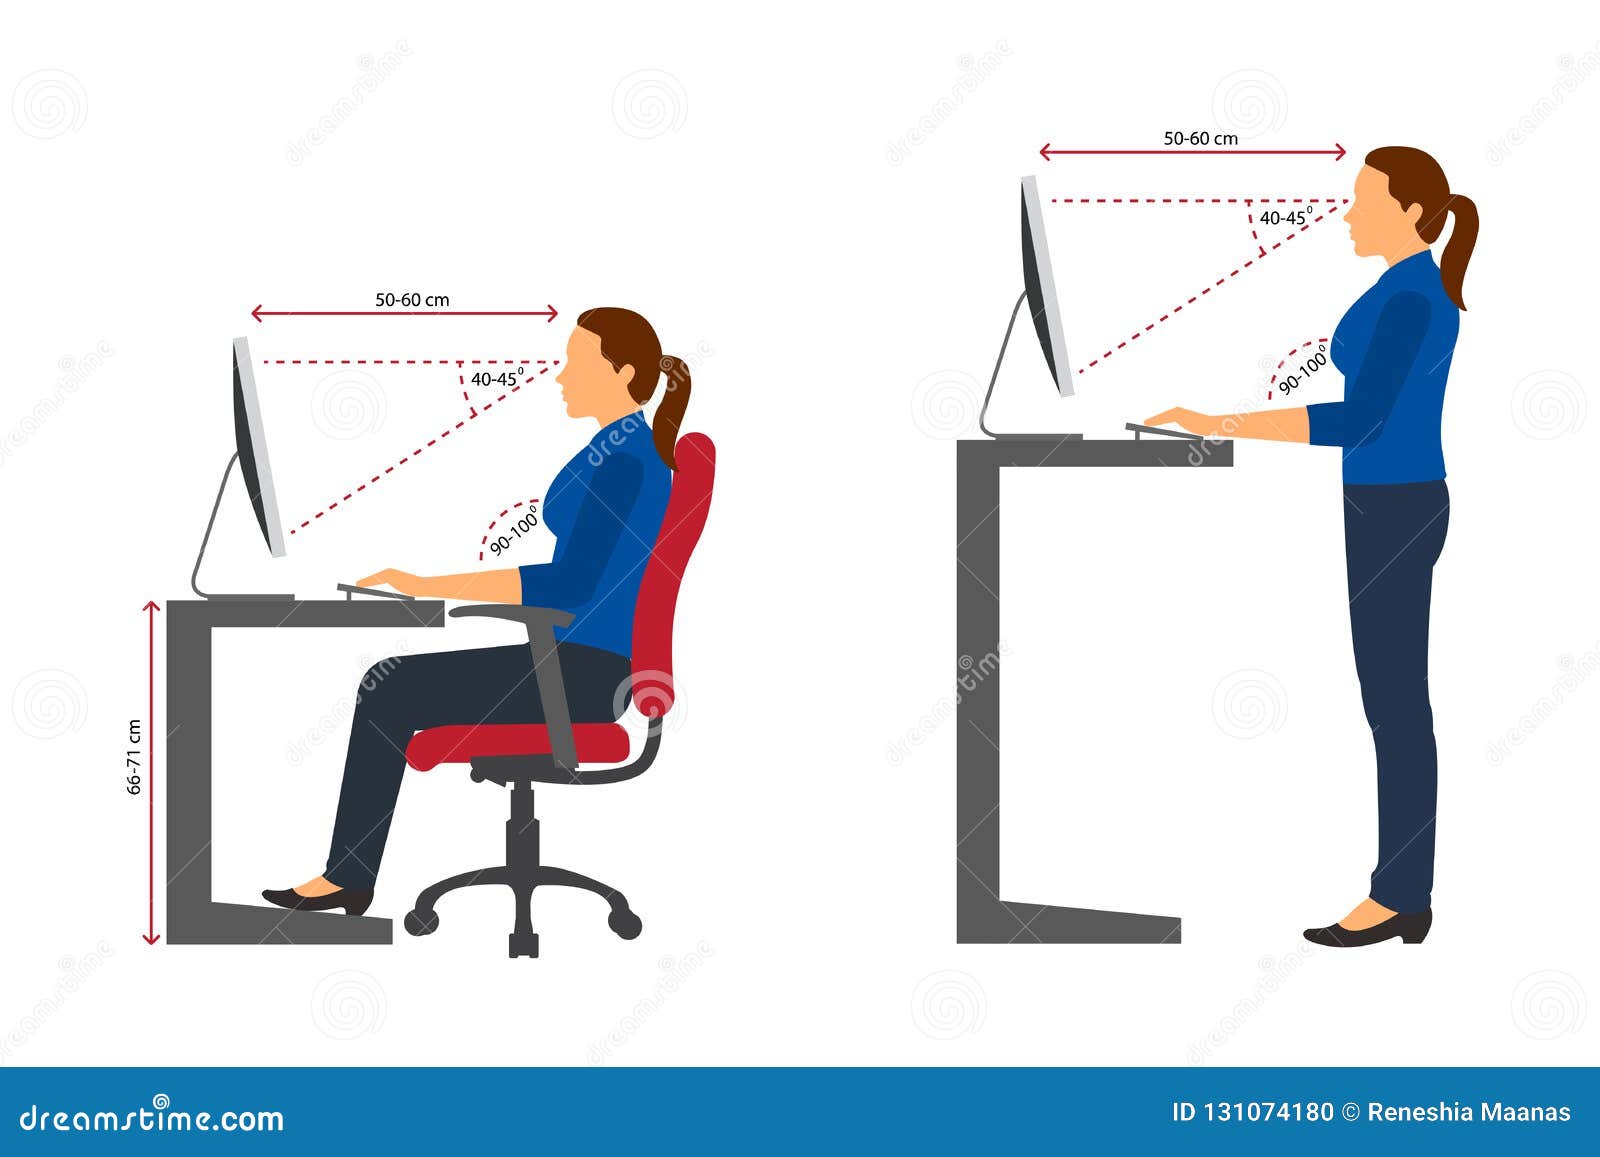 ergonomics woman correct sitting and standing posture when using a computer